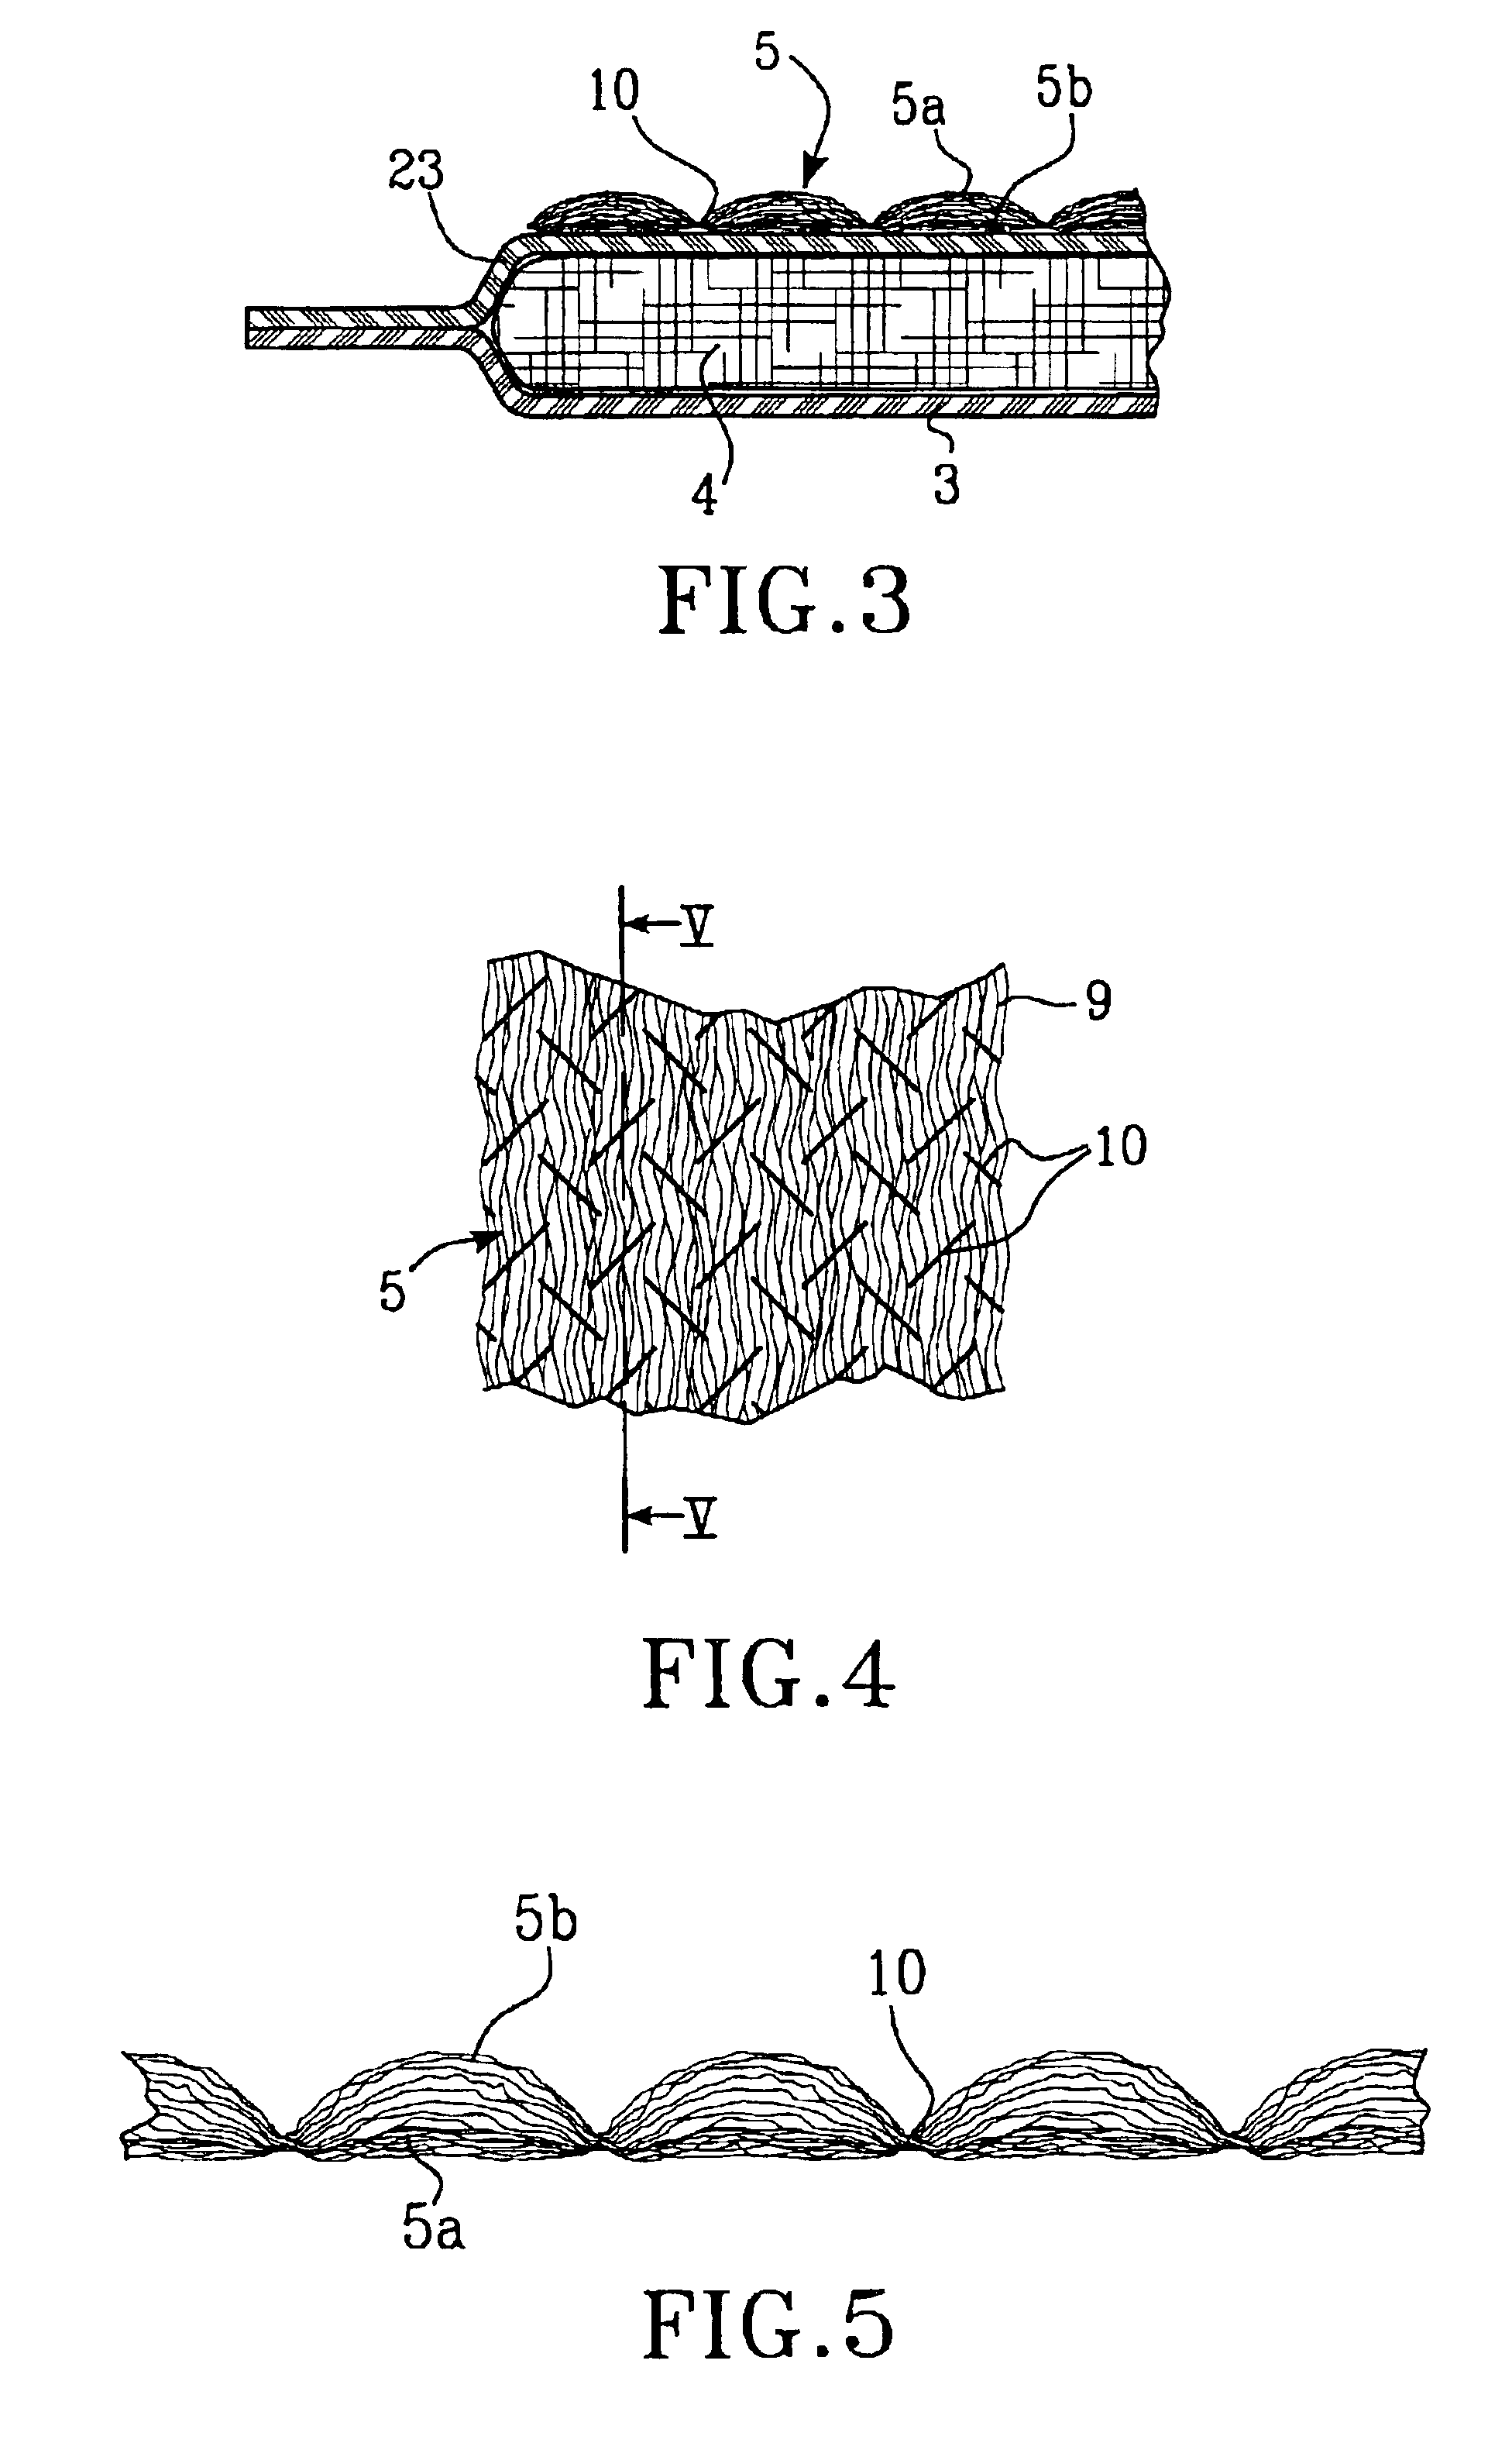 Fibrous material layer, method for its manufacture, and absorbent article comprising the material layer in question